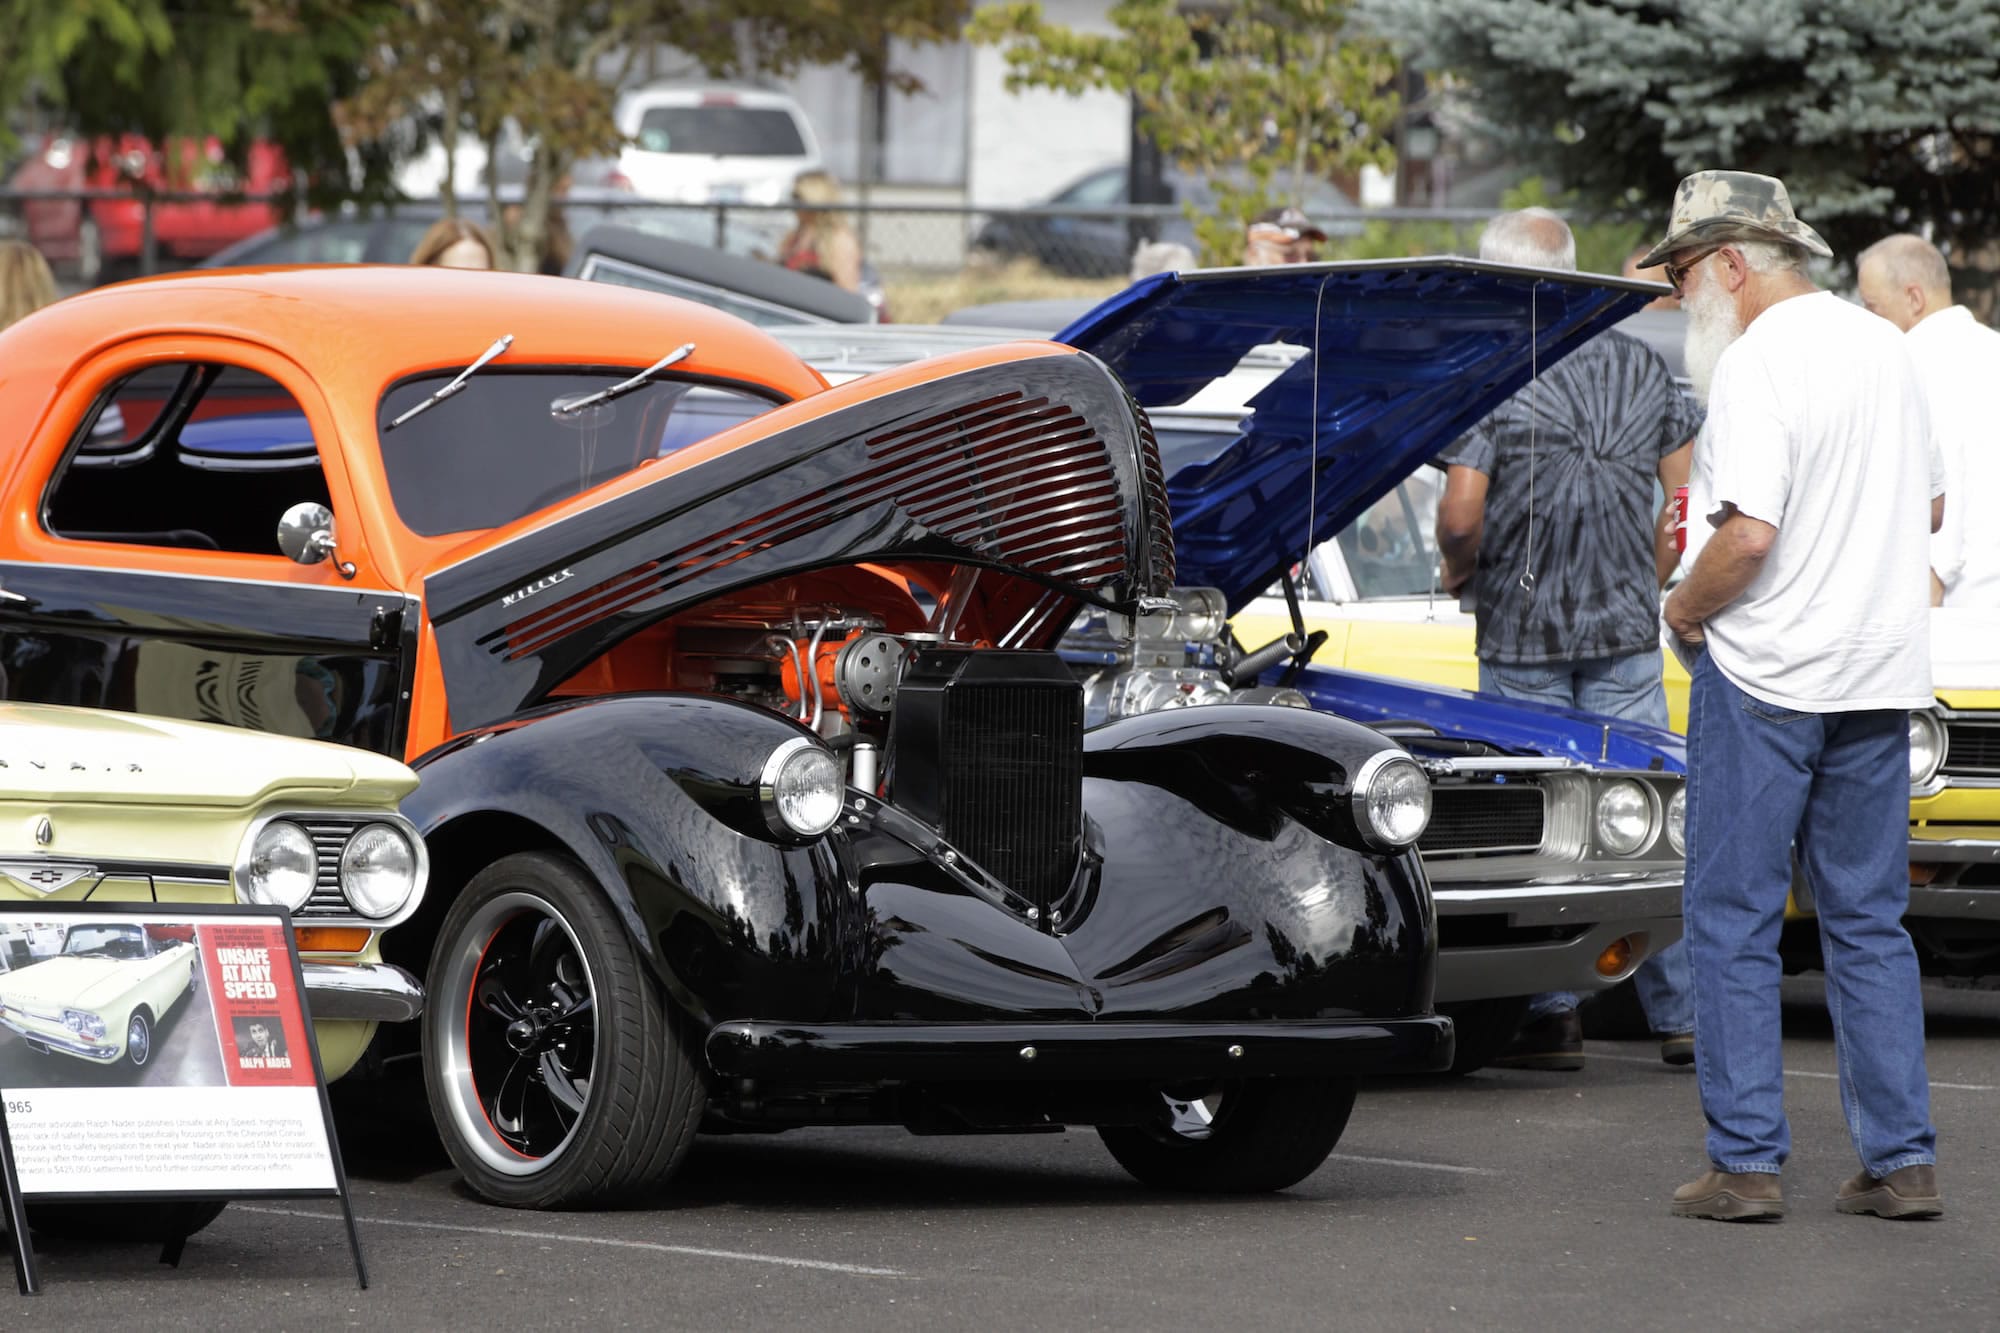 A 1938 Willy's Coupe owned by Ron Rowland on display at the First Evangelical Church Hot Rods and Hot Dogs event.